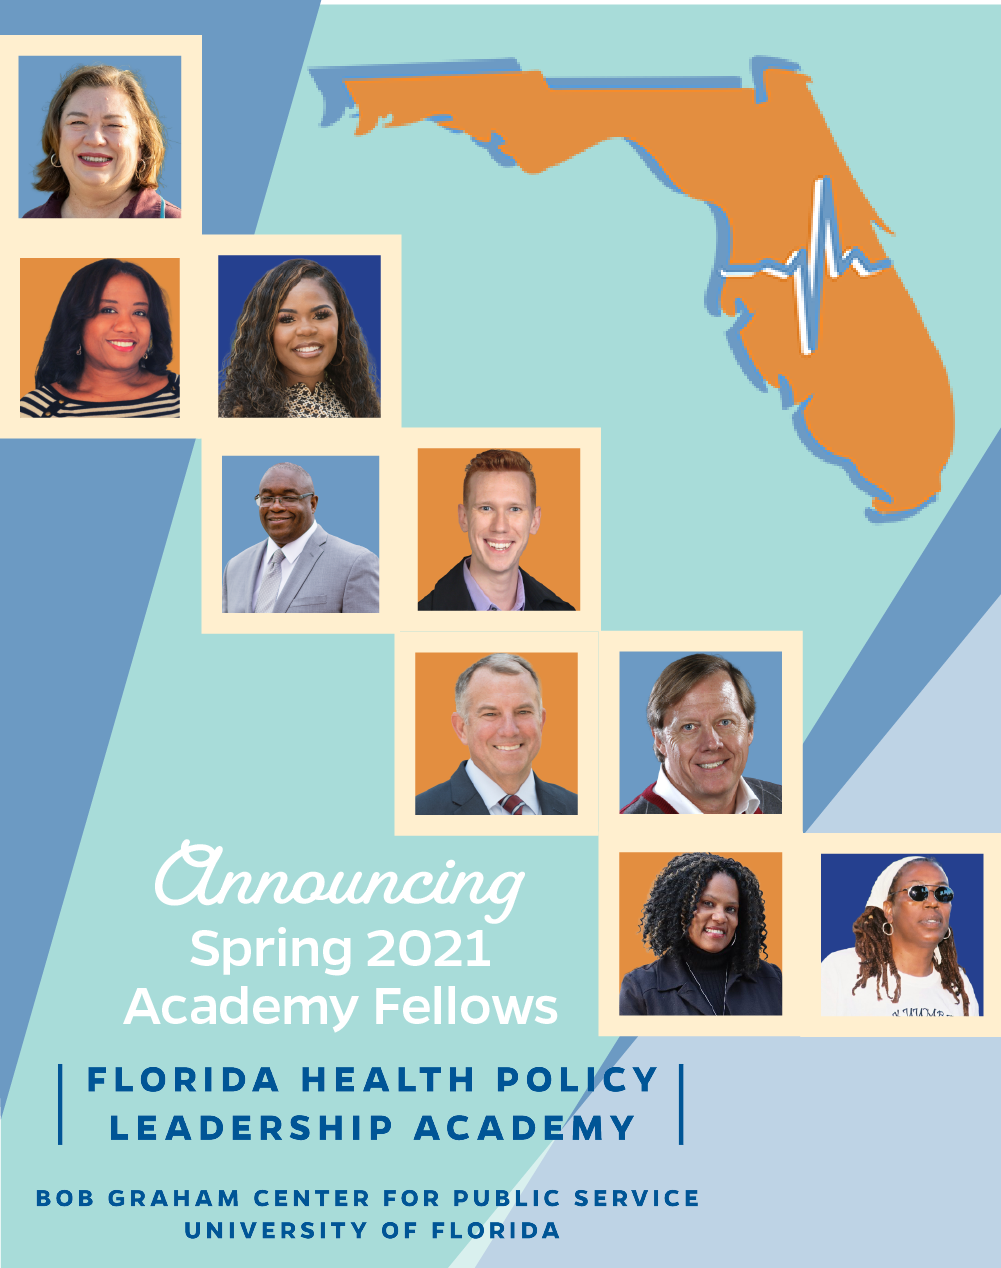 Nine individuals representing communities from across the state of Florida have been selected to the inaugural cohort of the Florida Health Policy Leadership Academy, a joint professional development initiative of the Bob Graham Center and UF Health.